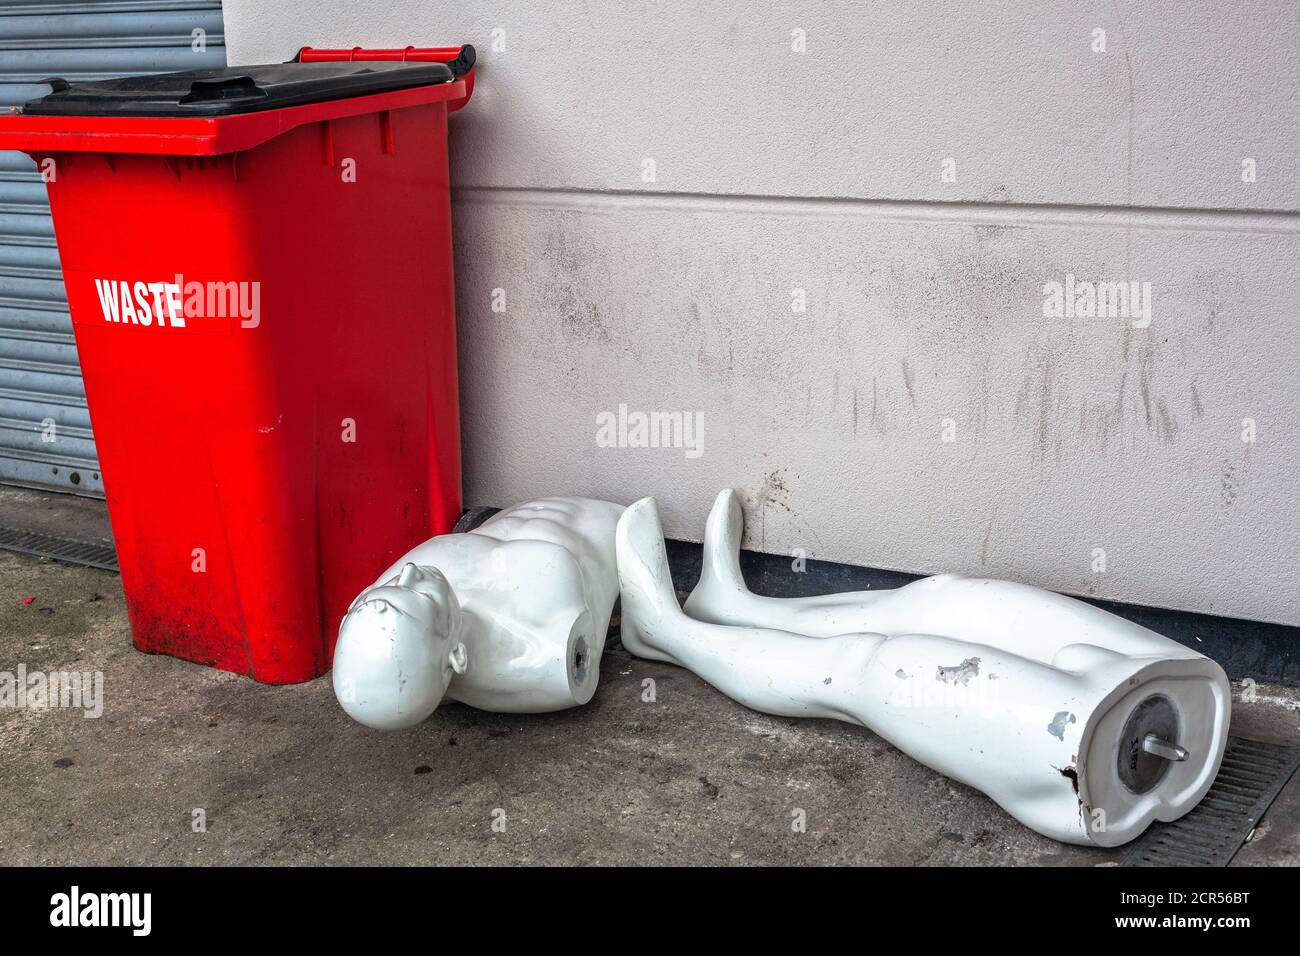 A male mannequin body parts beside a red waste bin. Stock Photo